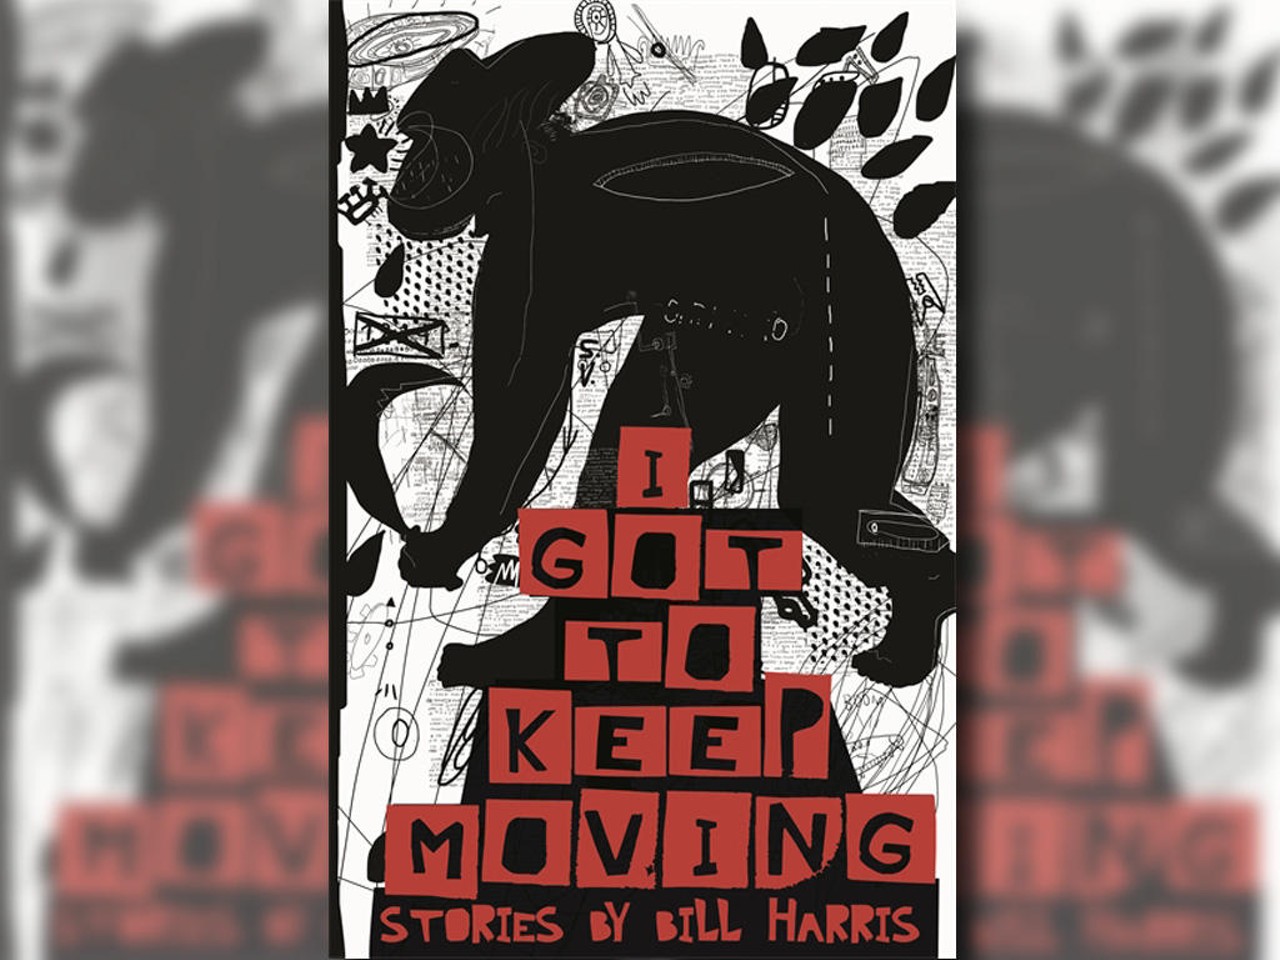 I Got To Keep Moving
Celebrated Detroit author Bill Harris cleverly intertwined 25 short stories into his new collection. The book follows a group of African-Americans in the southern United States before and after the Civil War, plotting their trek from a plantation in Alabama to the Midwest. Although fiction, Harris expertly drives the work in historical events, making it appealing to fiction and nonfiction lovers alike. Harris creates a double-edged sword, painting a true image of slavery in the South, while simultaneously creating a cast of strong characters.